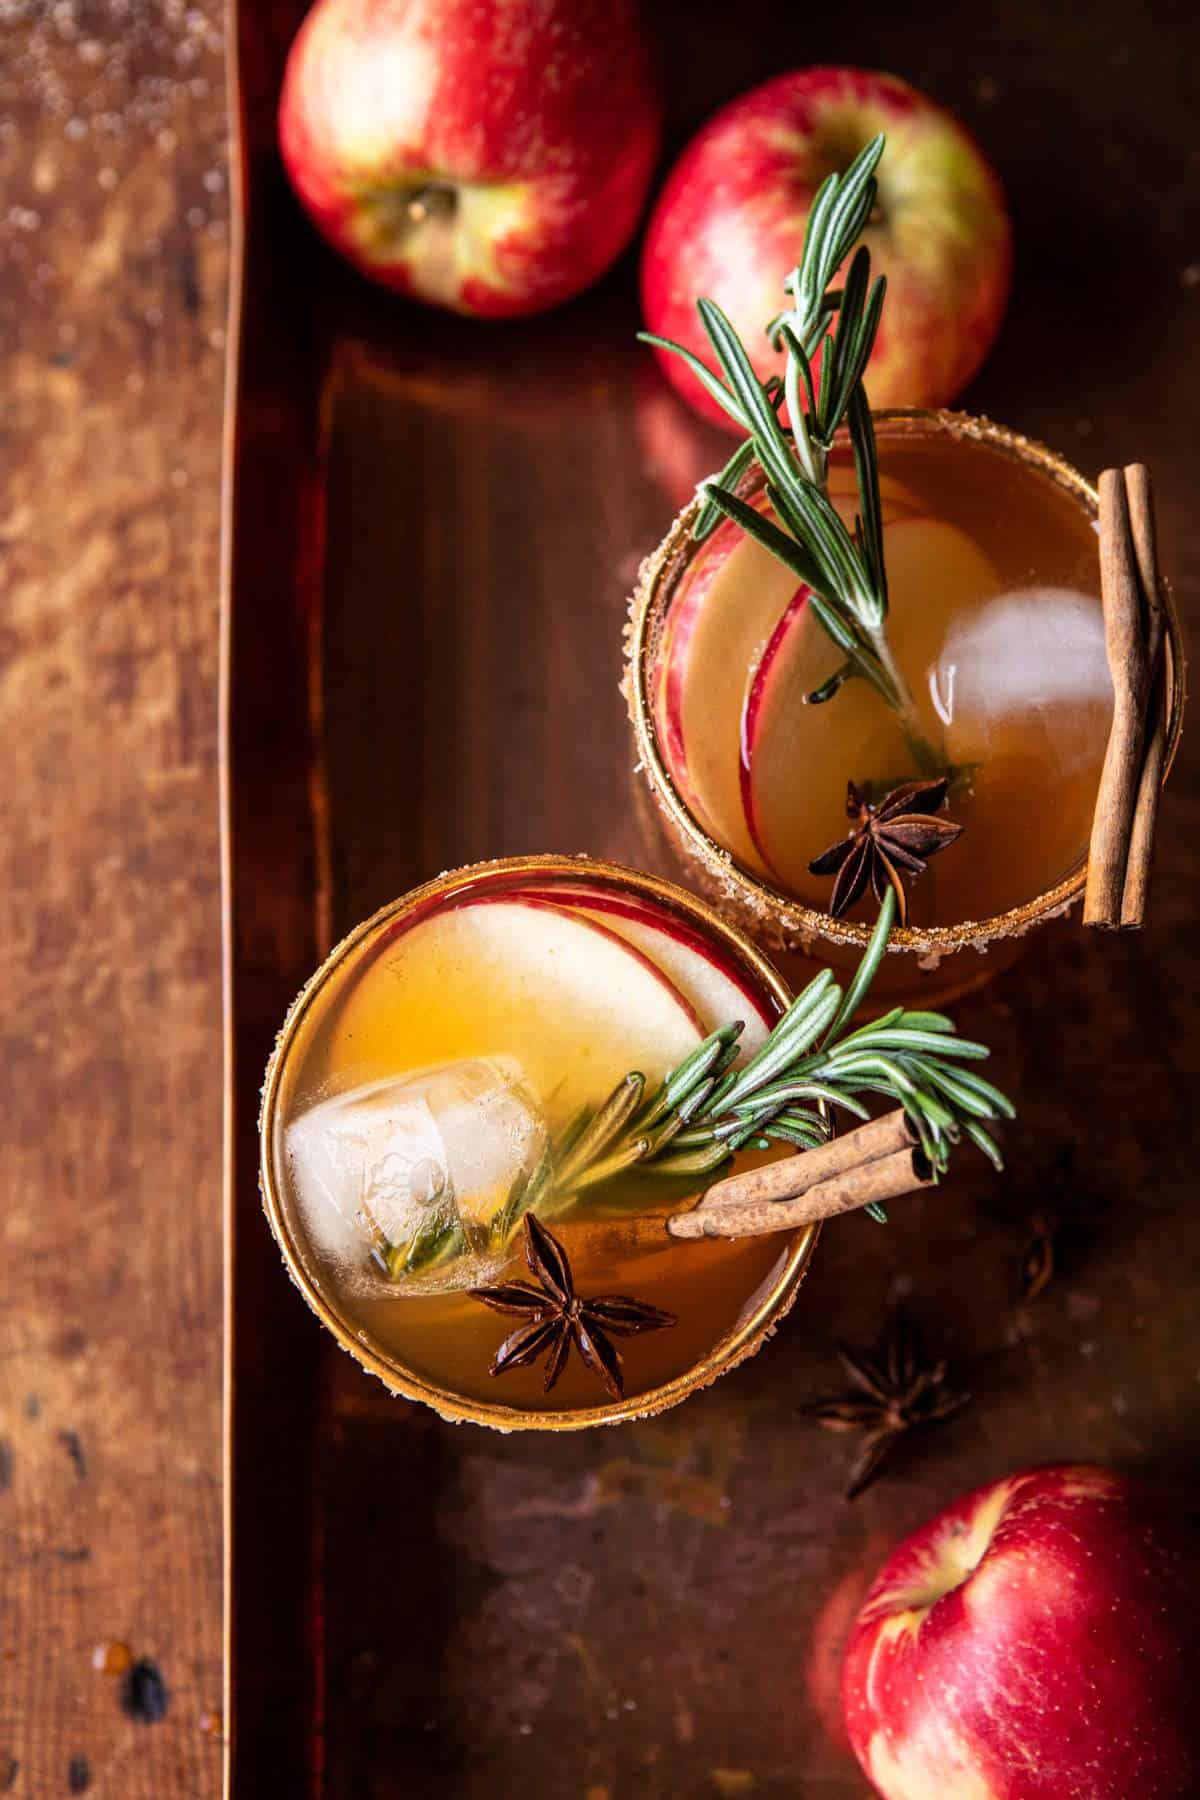 apple cider margarita with a cinnamon stick and rosemary.